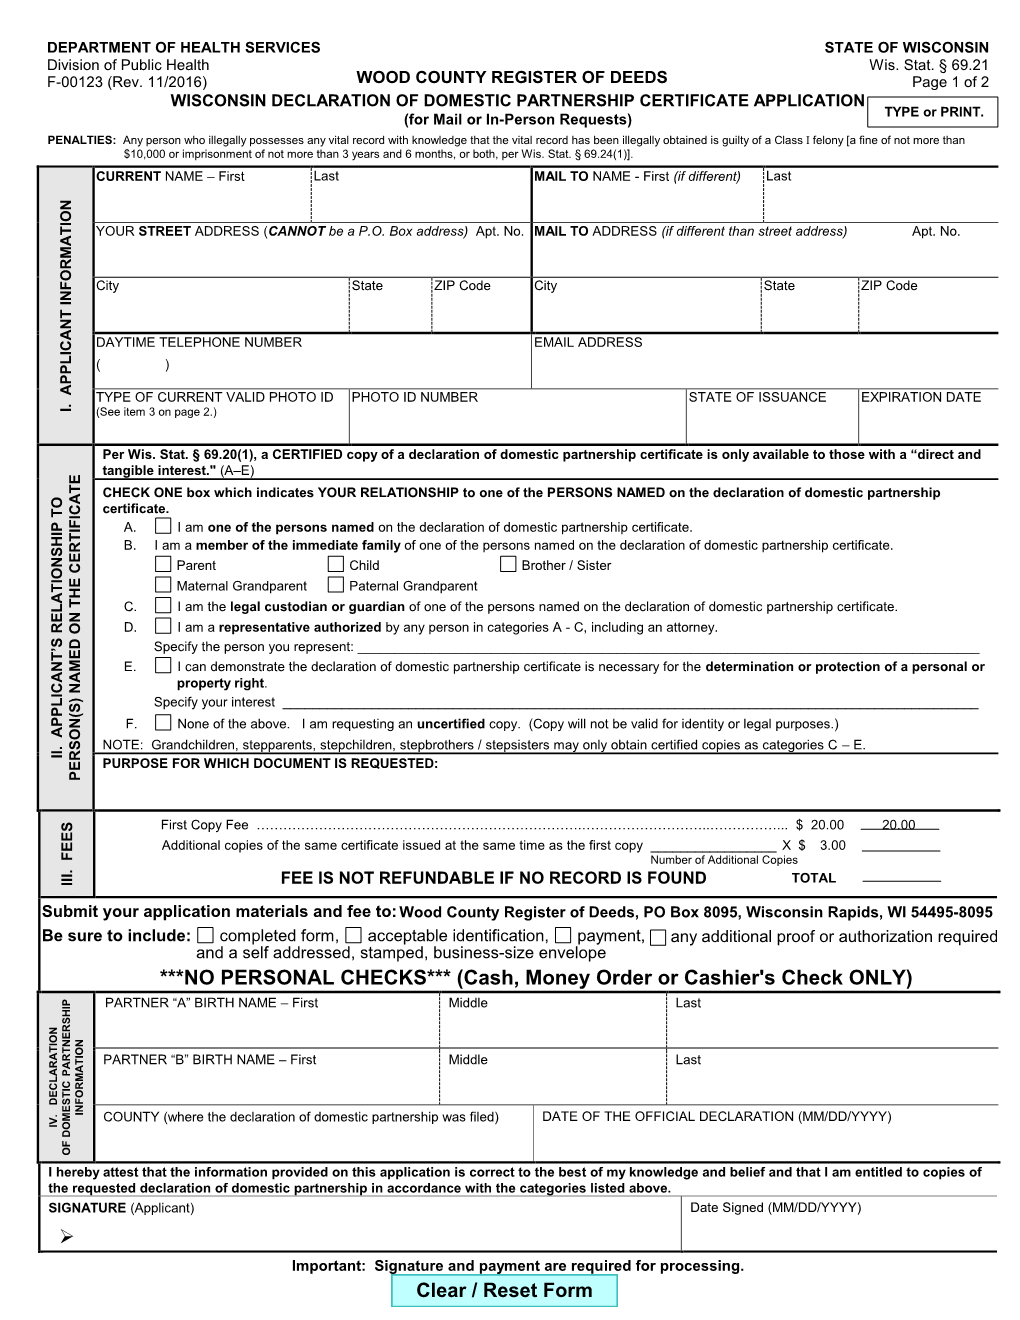 WISCONSIN DECLARATION of DOMESTIC PARTNERSHIP CERTIFICATE APPLICATION TYPE Or PRINT